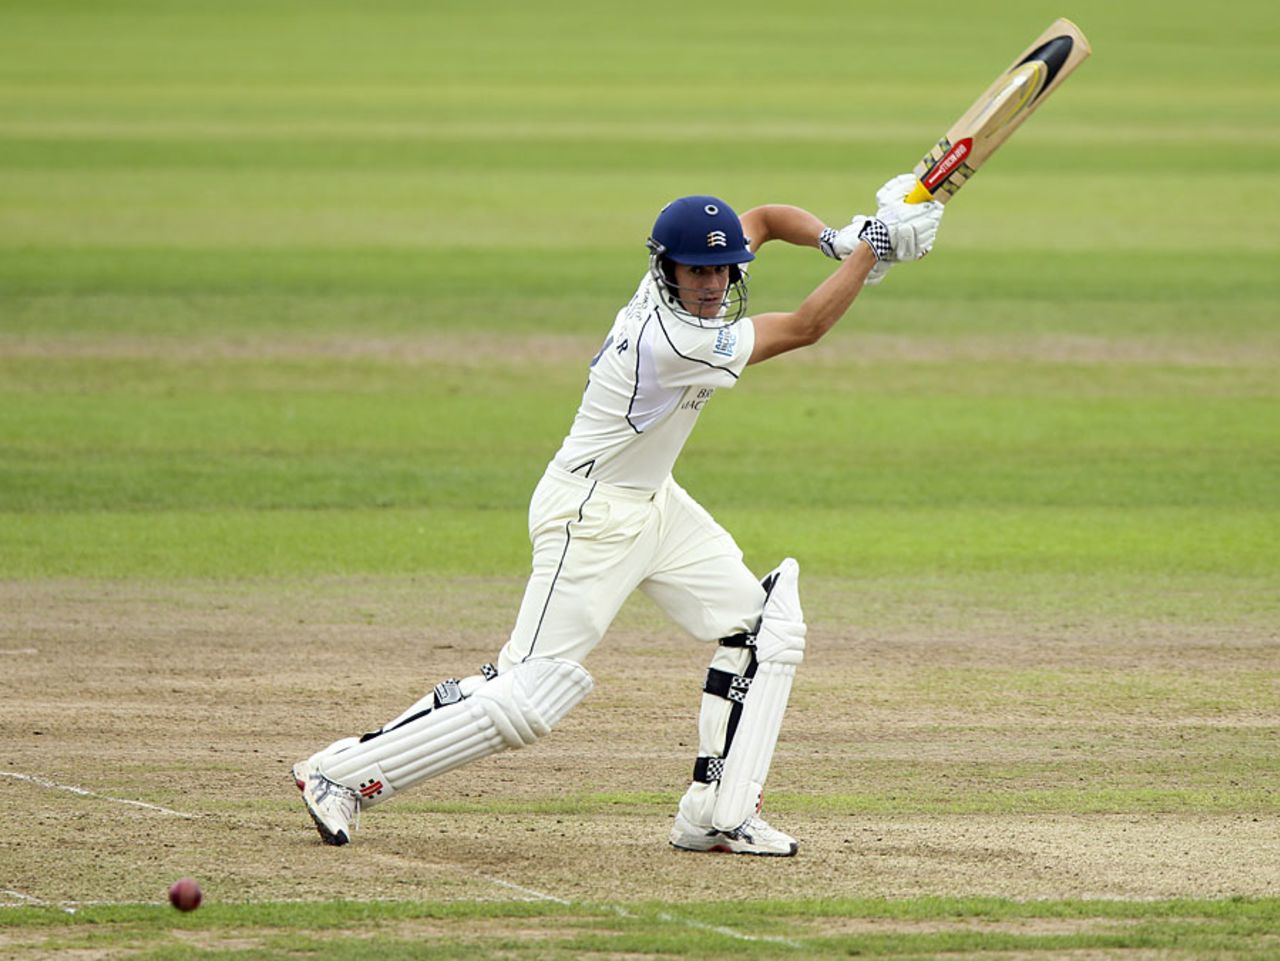 Neil Dexter drives square during his hundred, Warwickshire v Middlesex, County Championship, Division One, Edgbaston, August 21, 2012